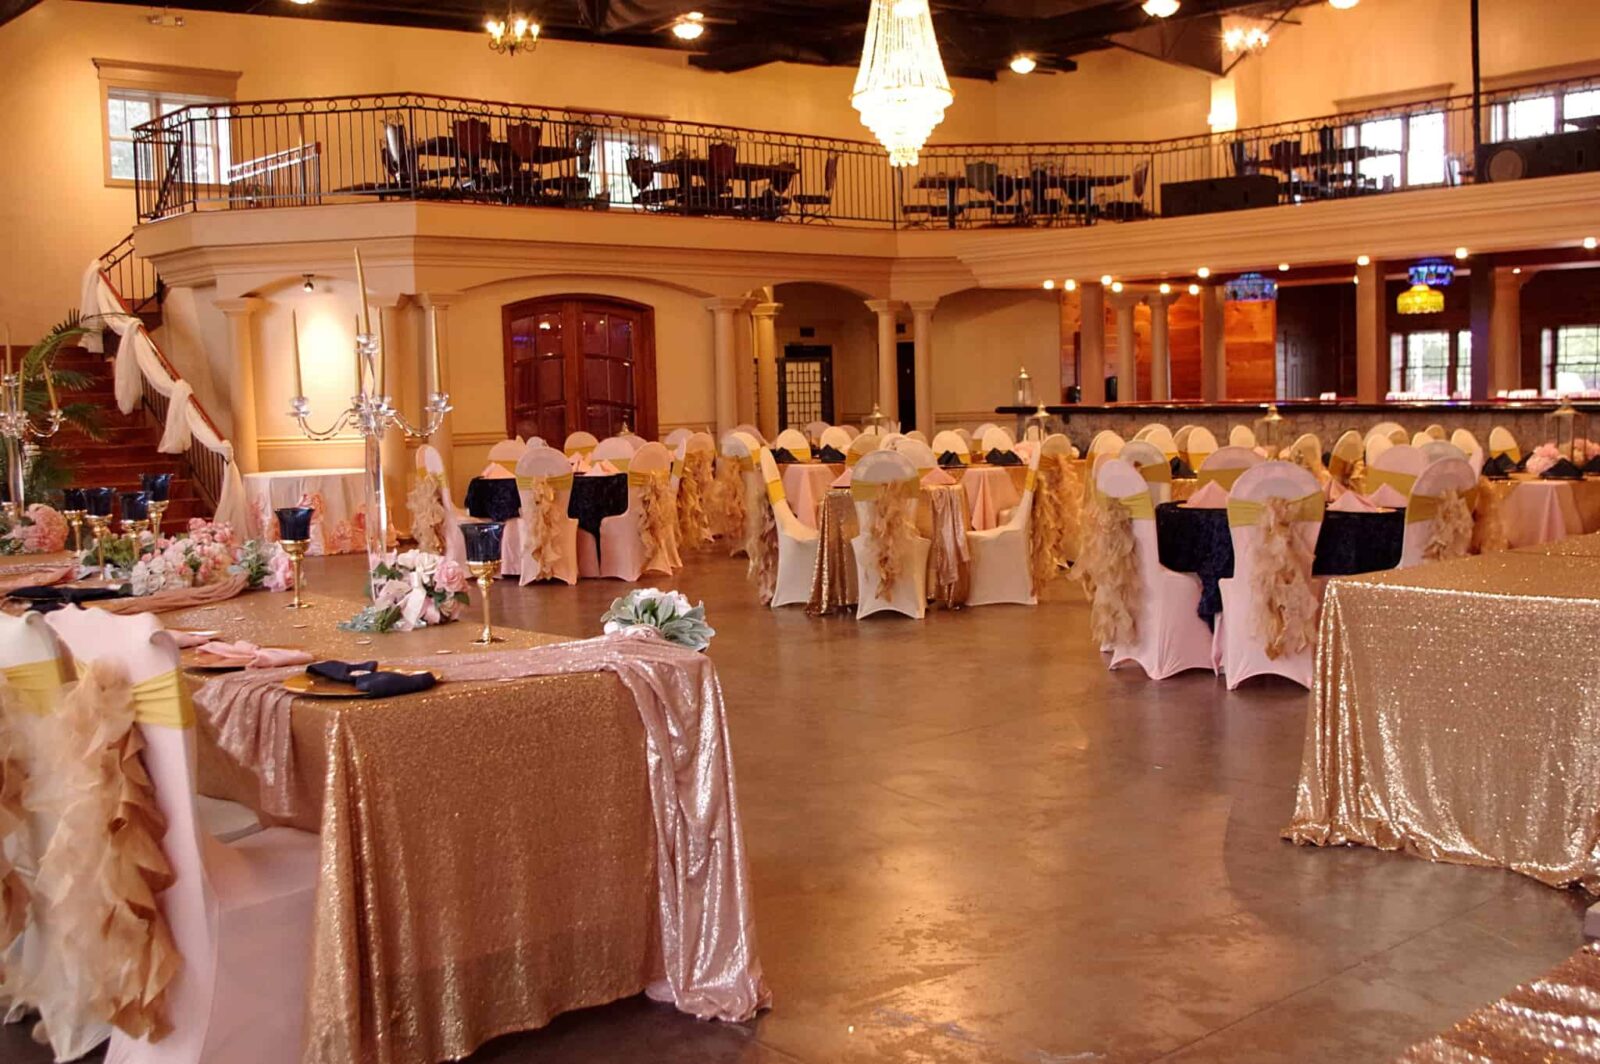 A large room with many tables and chairs